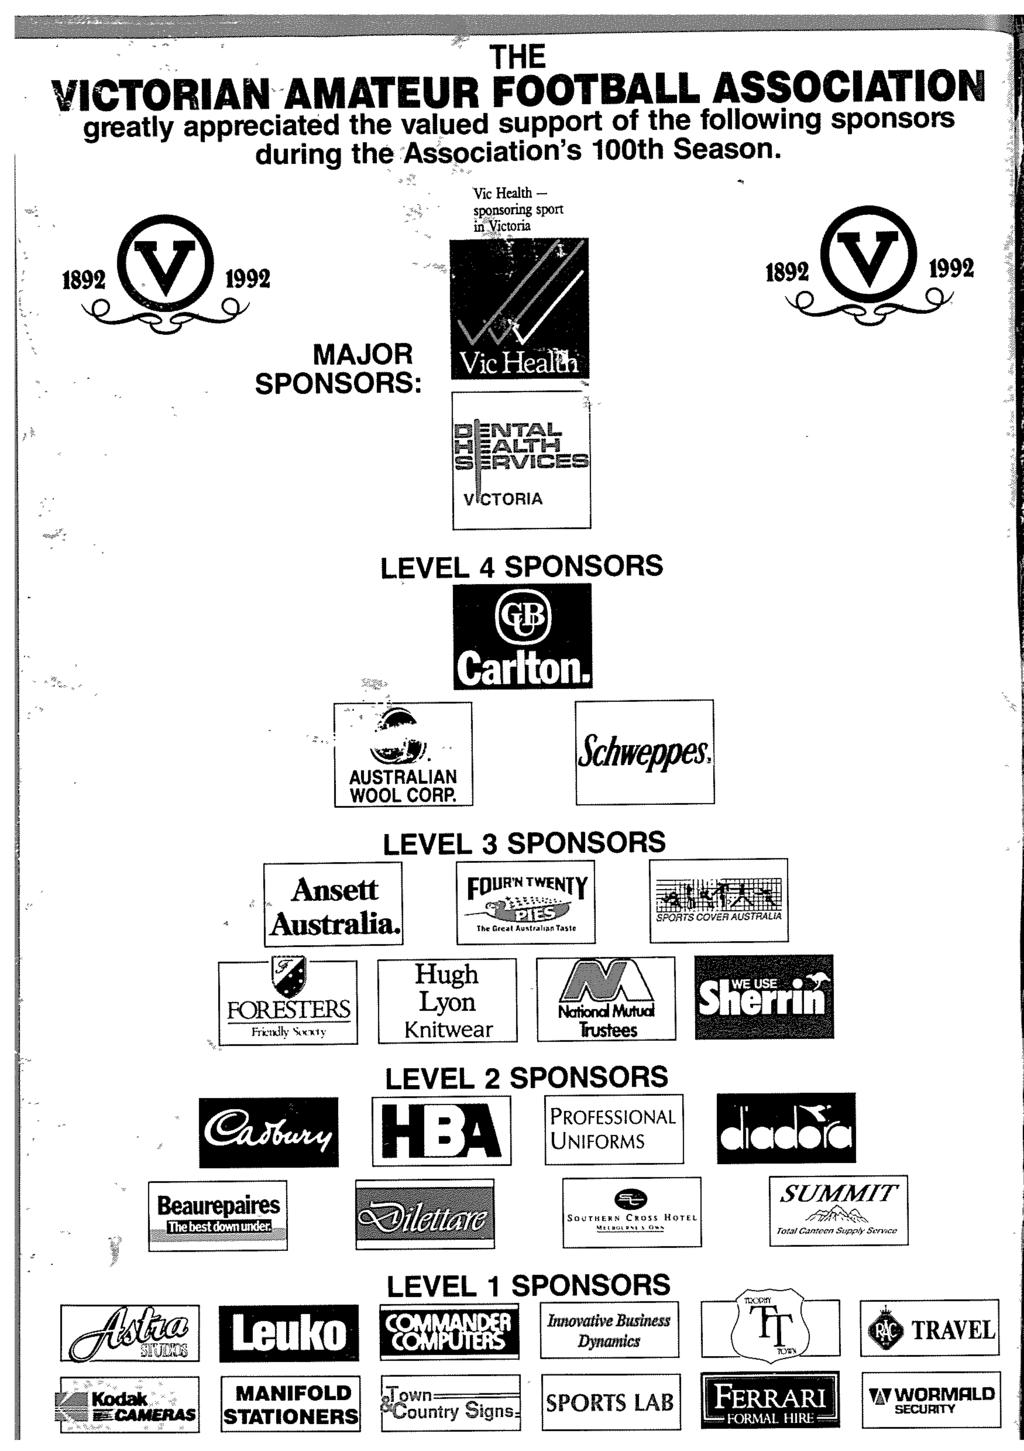 THE VICTORIAN- AMATEUR FOOTBALL ASSOCIATIO N greatly appreciated the valued support of the following sponsors during the Association's 100th Season.